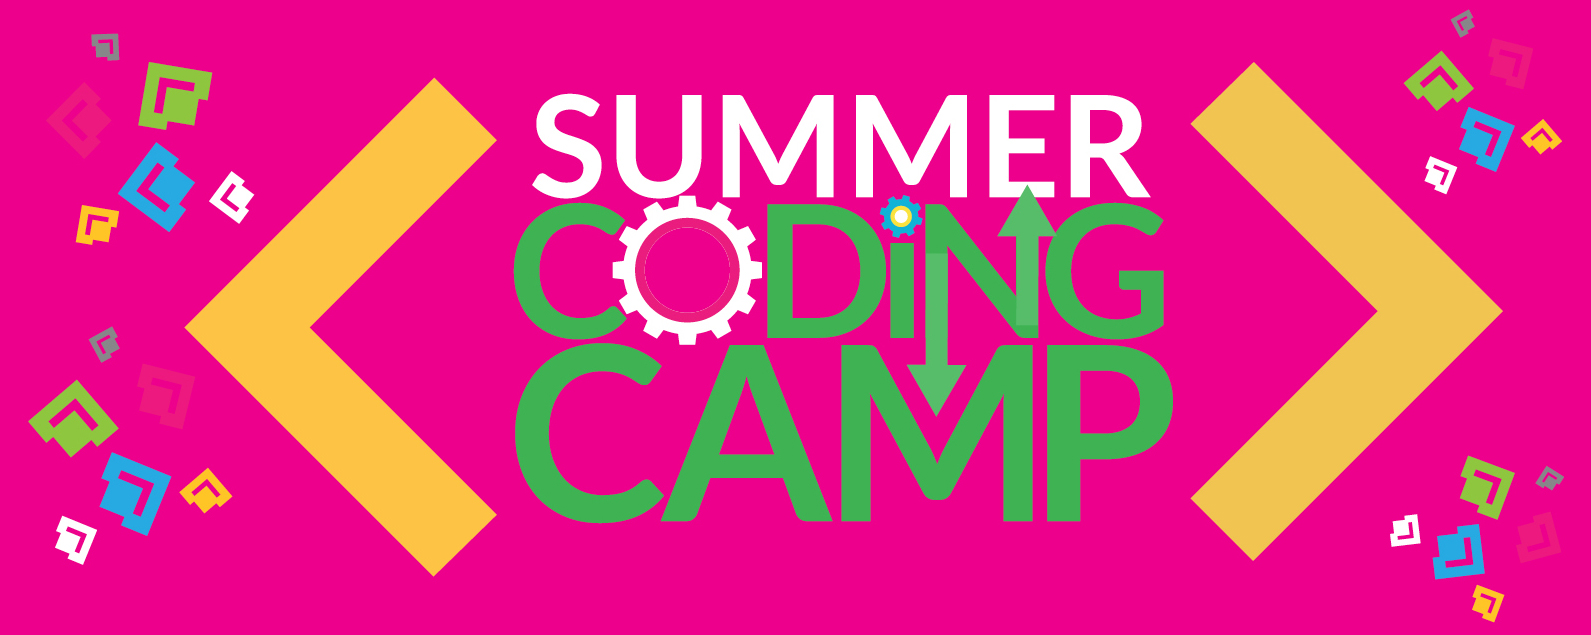 Summer Coding Camp logo consisting of large brackets and cogwheels